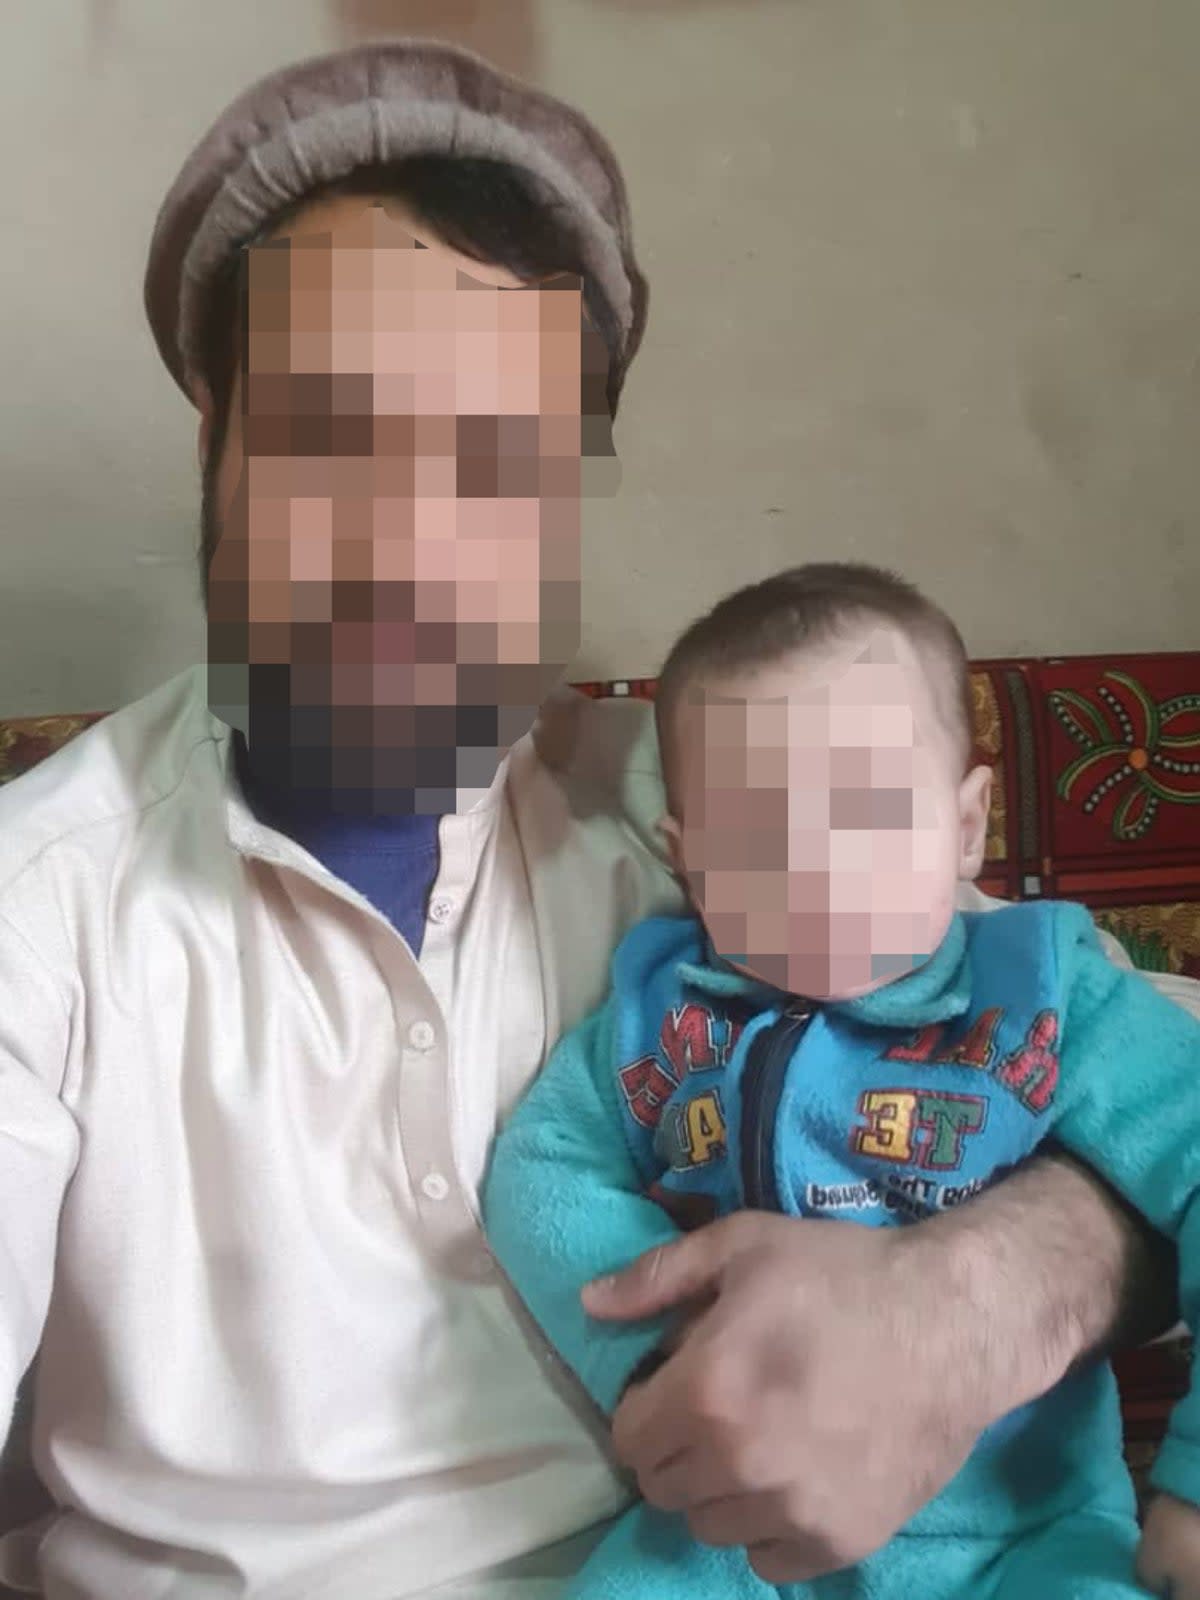 Relatives said 333 sniper Walid (left) was killed by the Taliban shortly after the fall of Kabul. His face, and that of his son, have been blurred to protect his family in Afghanistan. (Supplied)